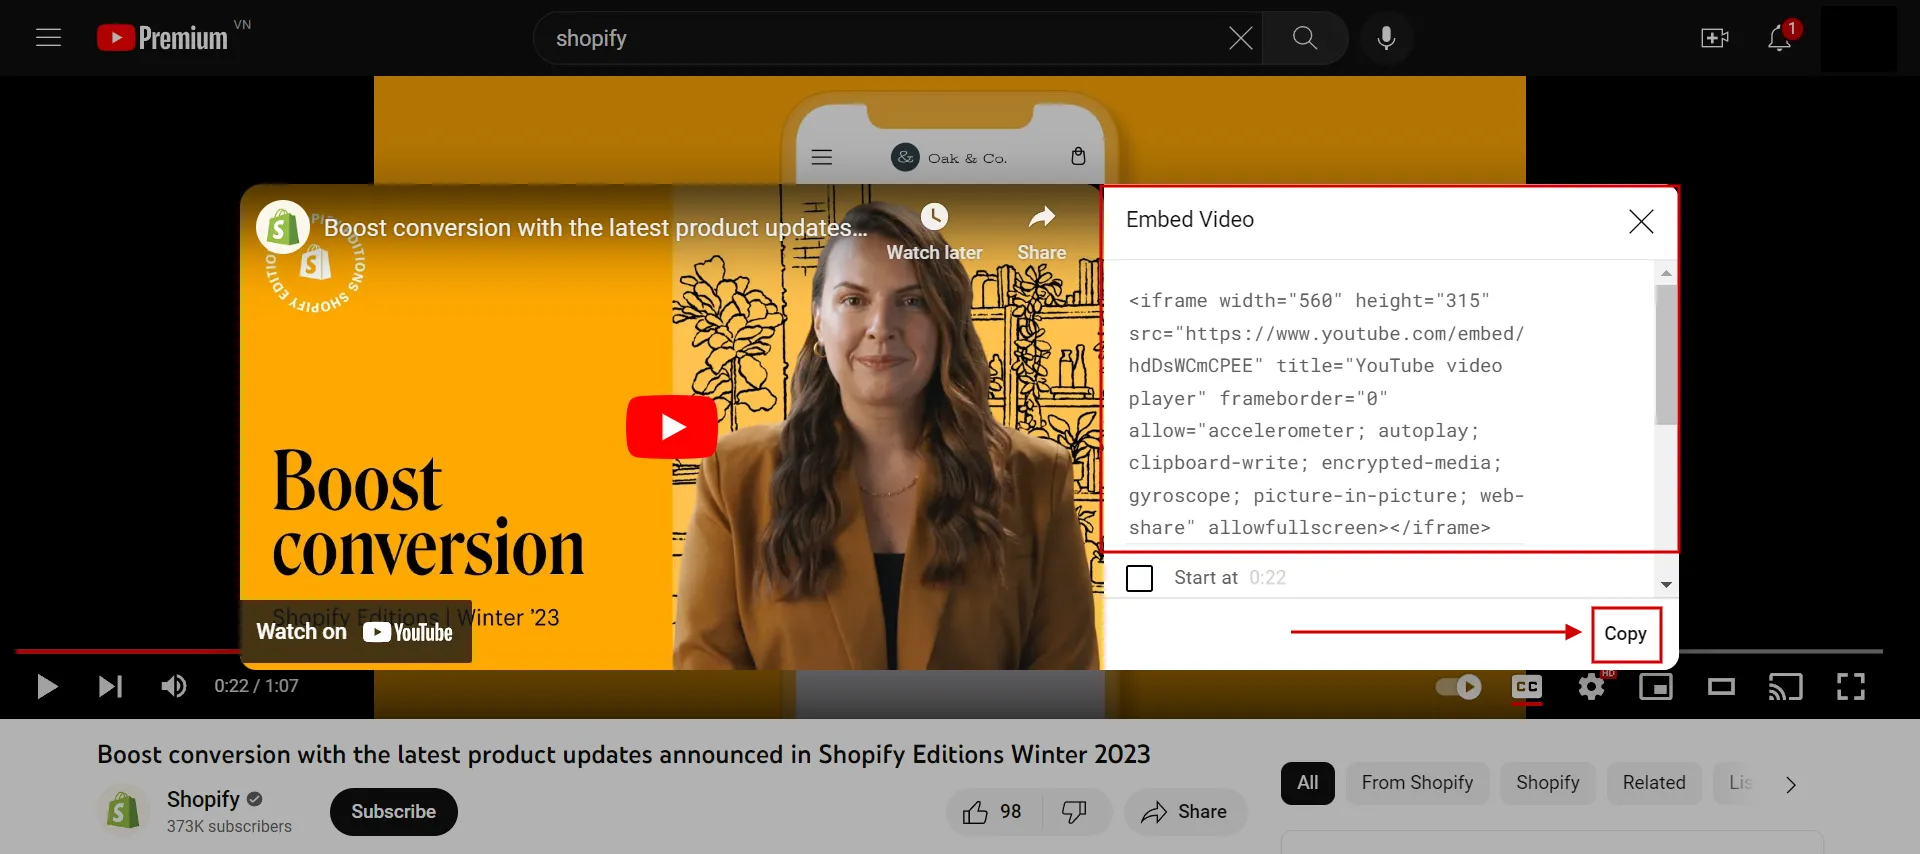 Copy the video embed snippet code